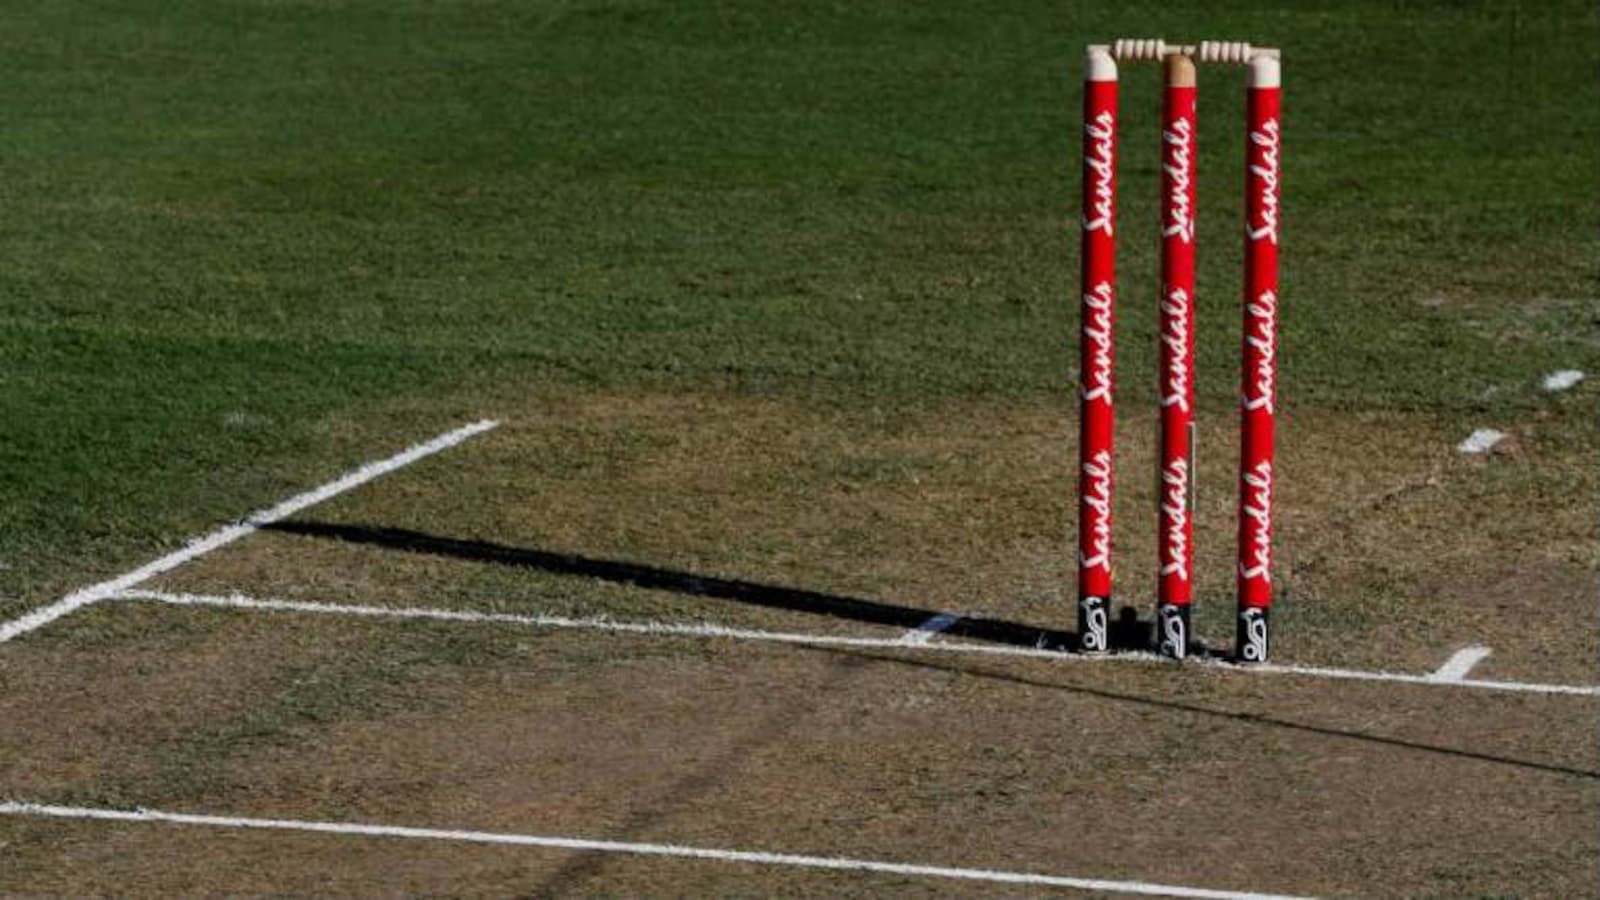 The stump mic conundrum: Why are cricketers ruffled?